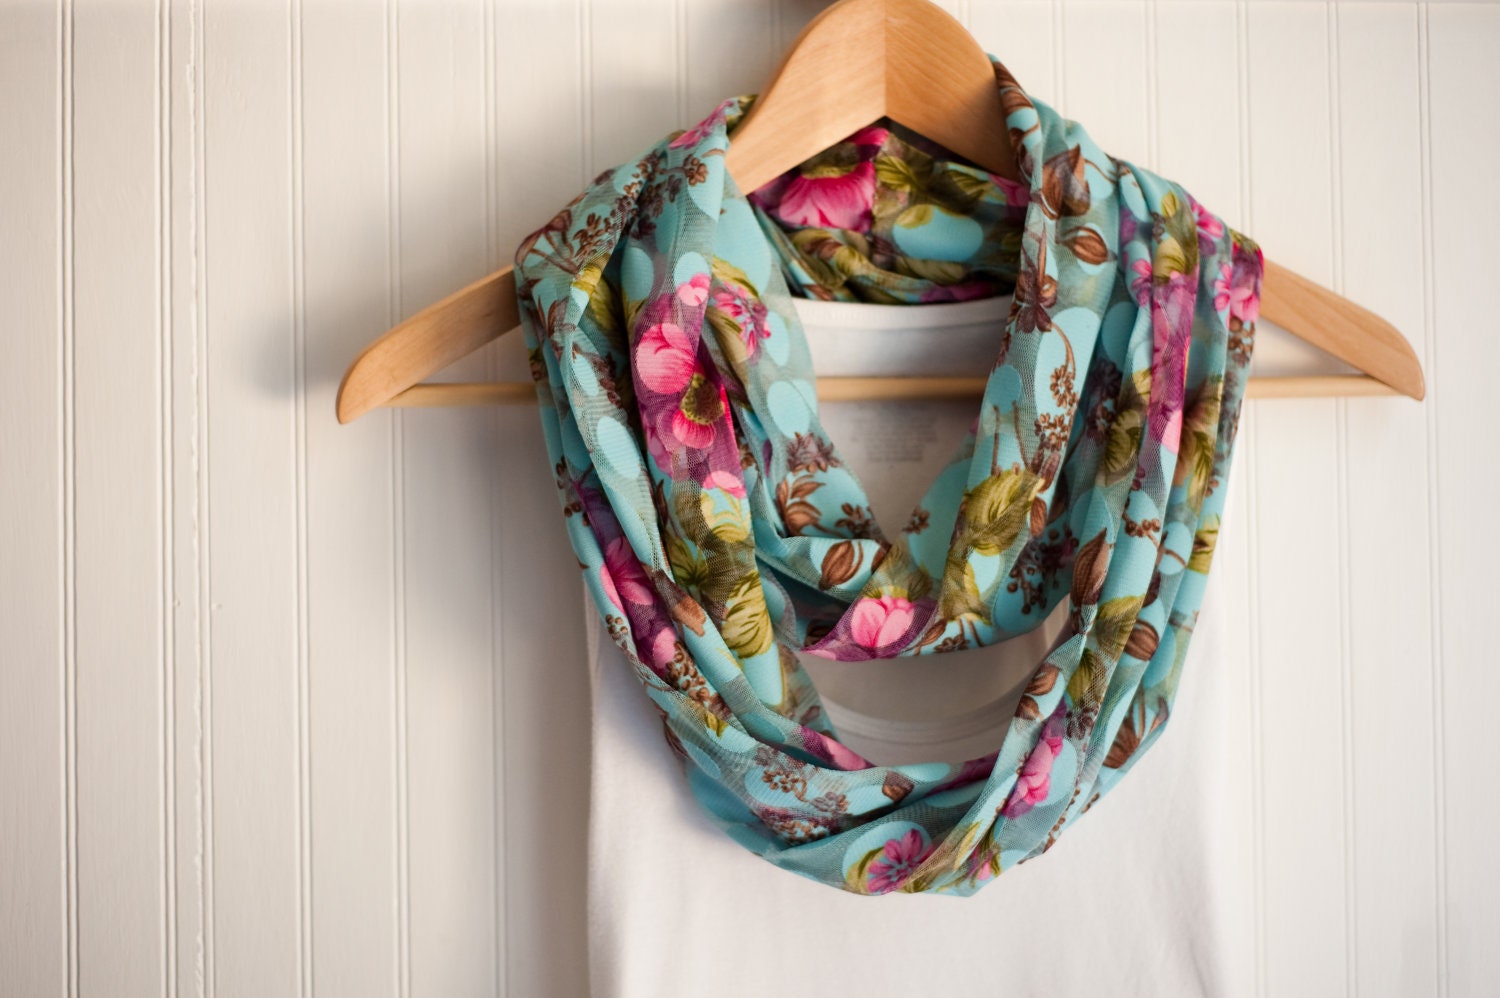 Floral Long Circle Infinity Scarf  Featured in Women's Day Magazine.com and glo.msn